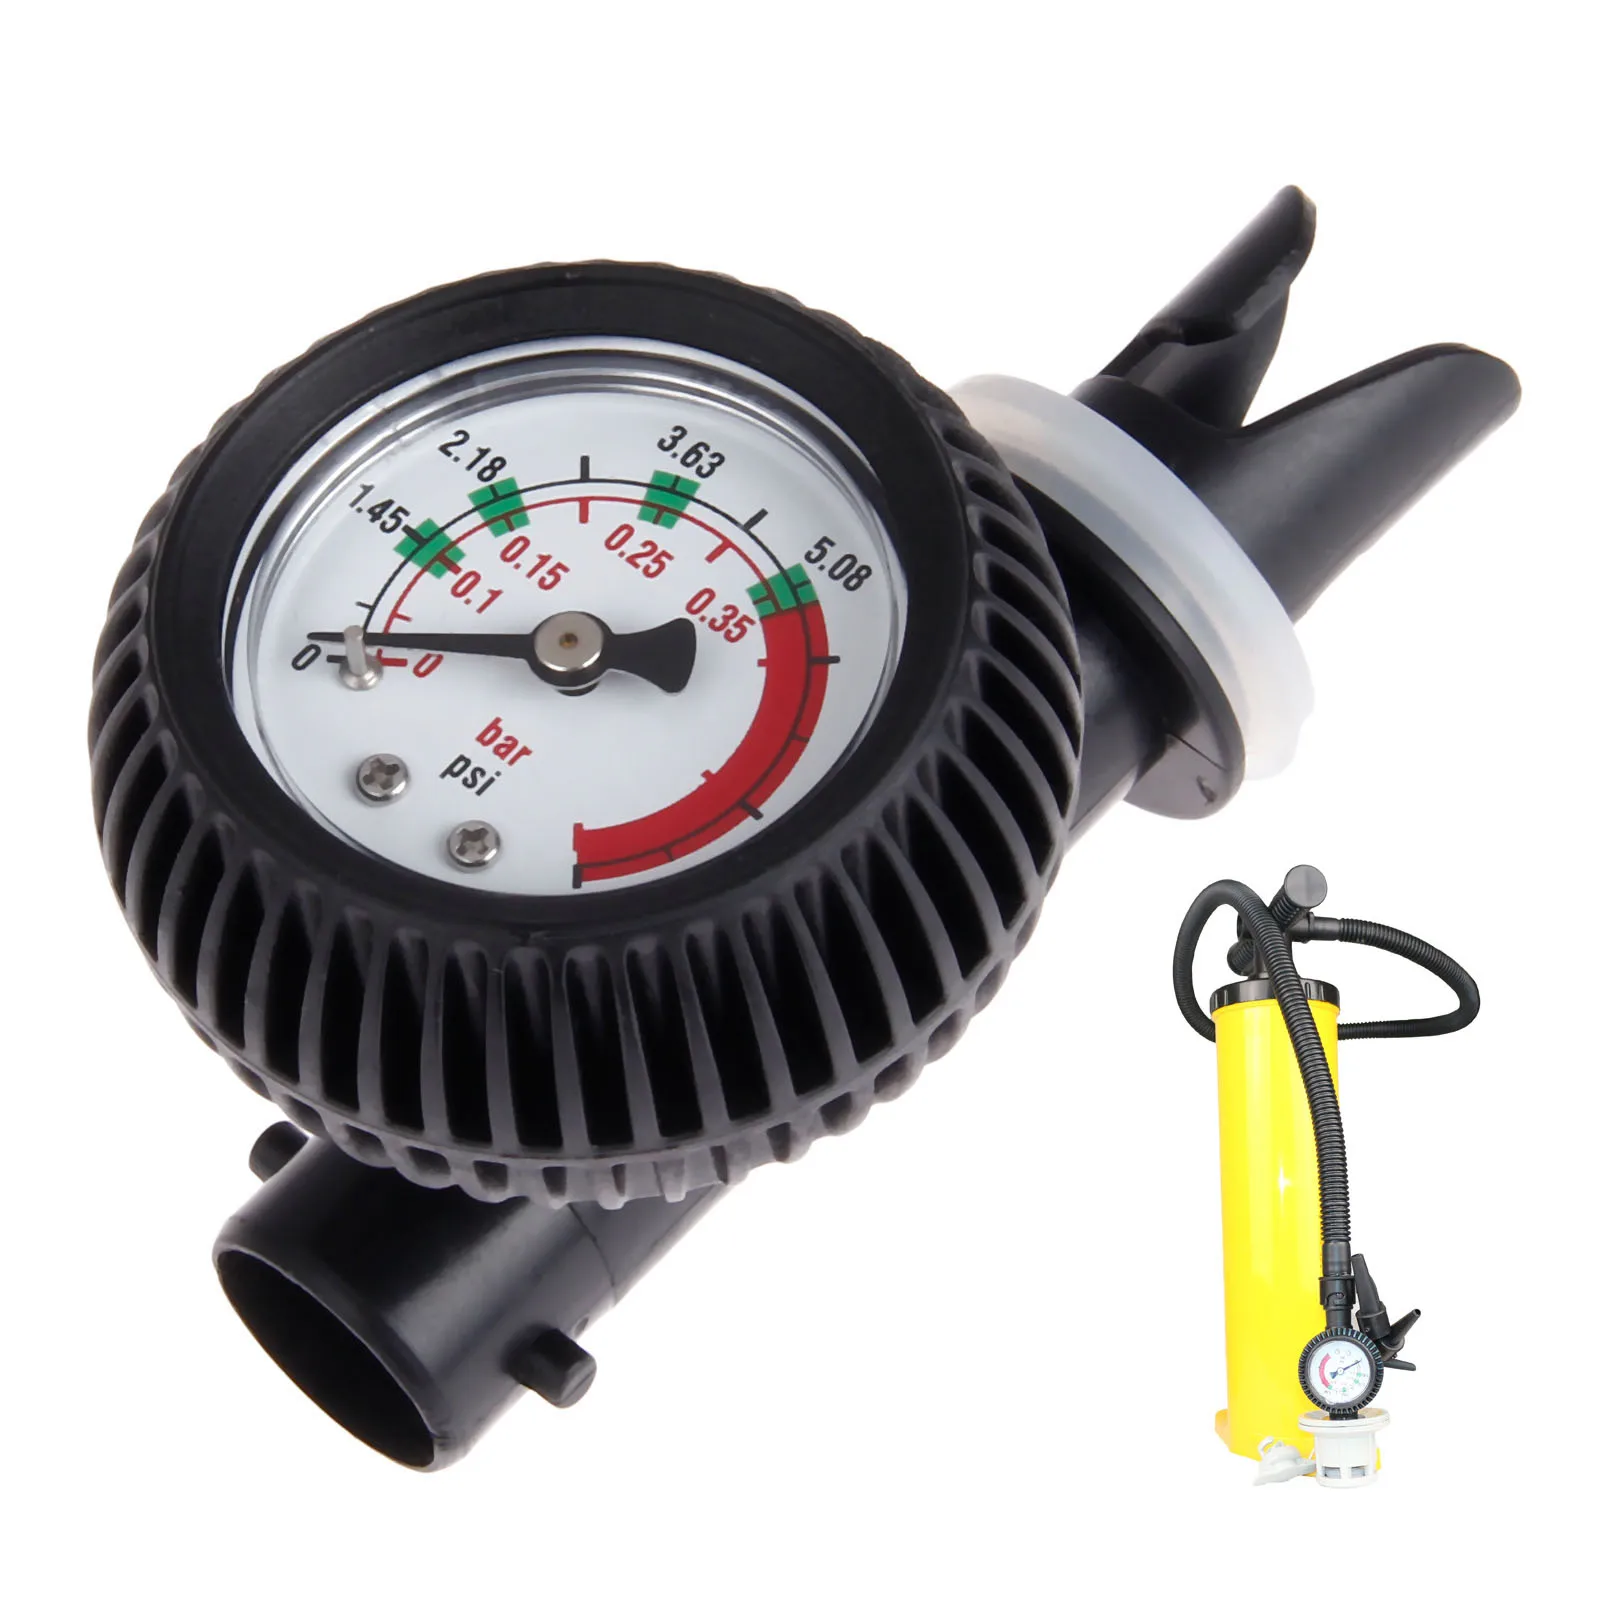 1 Pc Pressure Gauge Air Thermometer For Inflatable Boat Kayak Test Air Pressure Valve Connector Adapter Stand Up Paddle Boards 5psi inflatable boat air pressure gauge kayak tester valve connector thermometer pump manometer fishing boat air test barometer